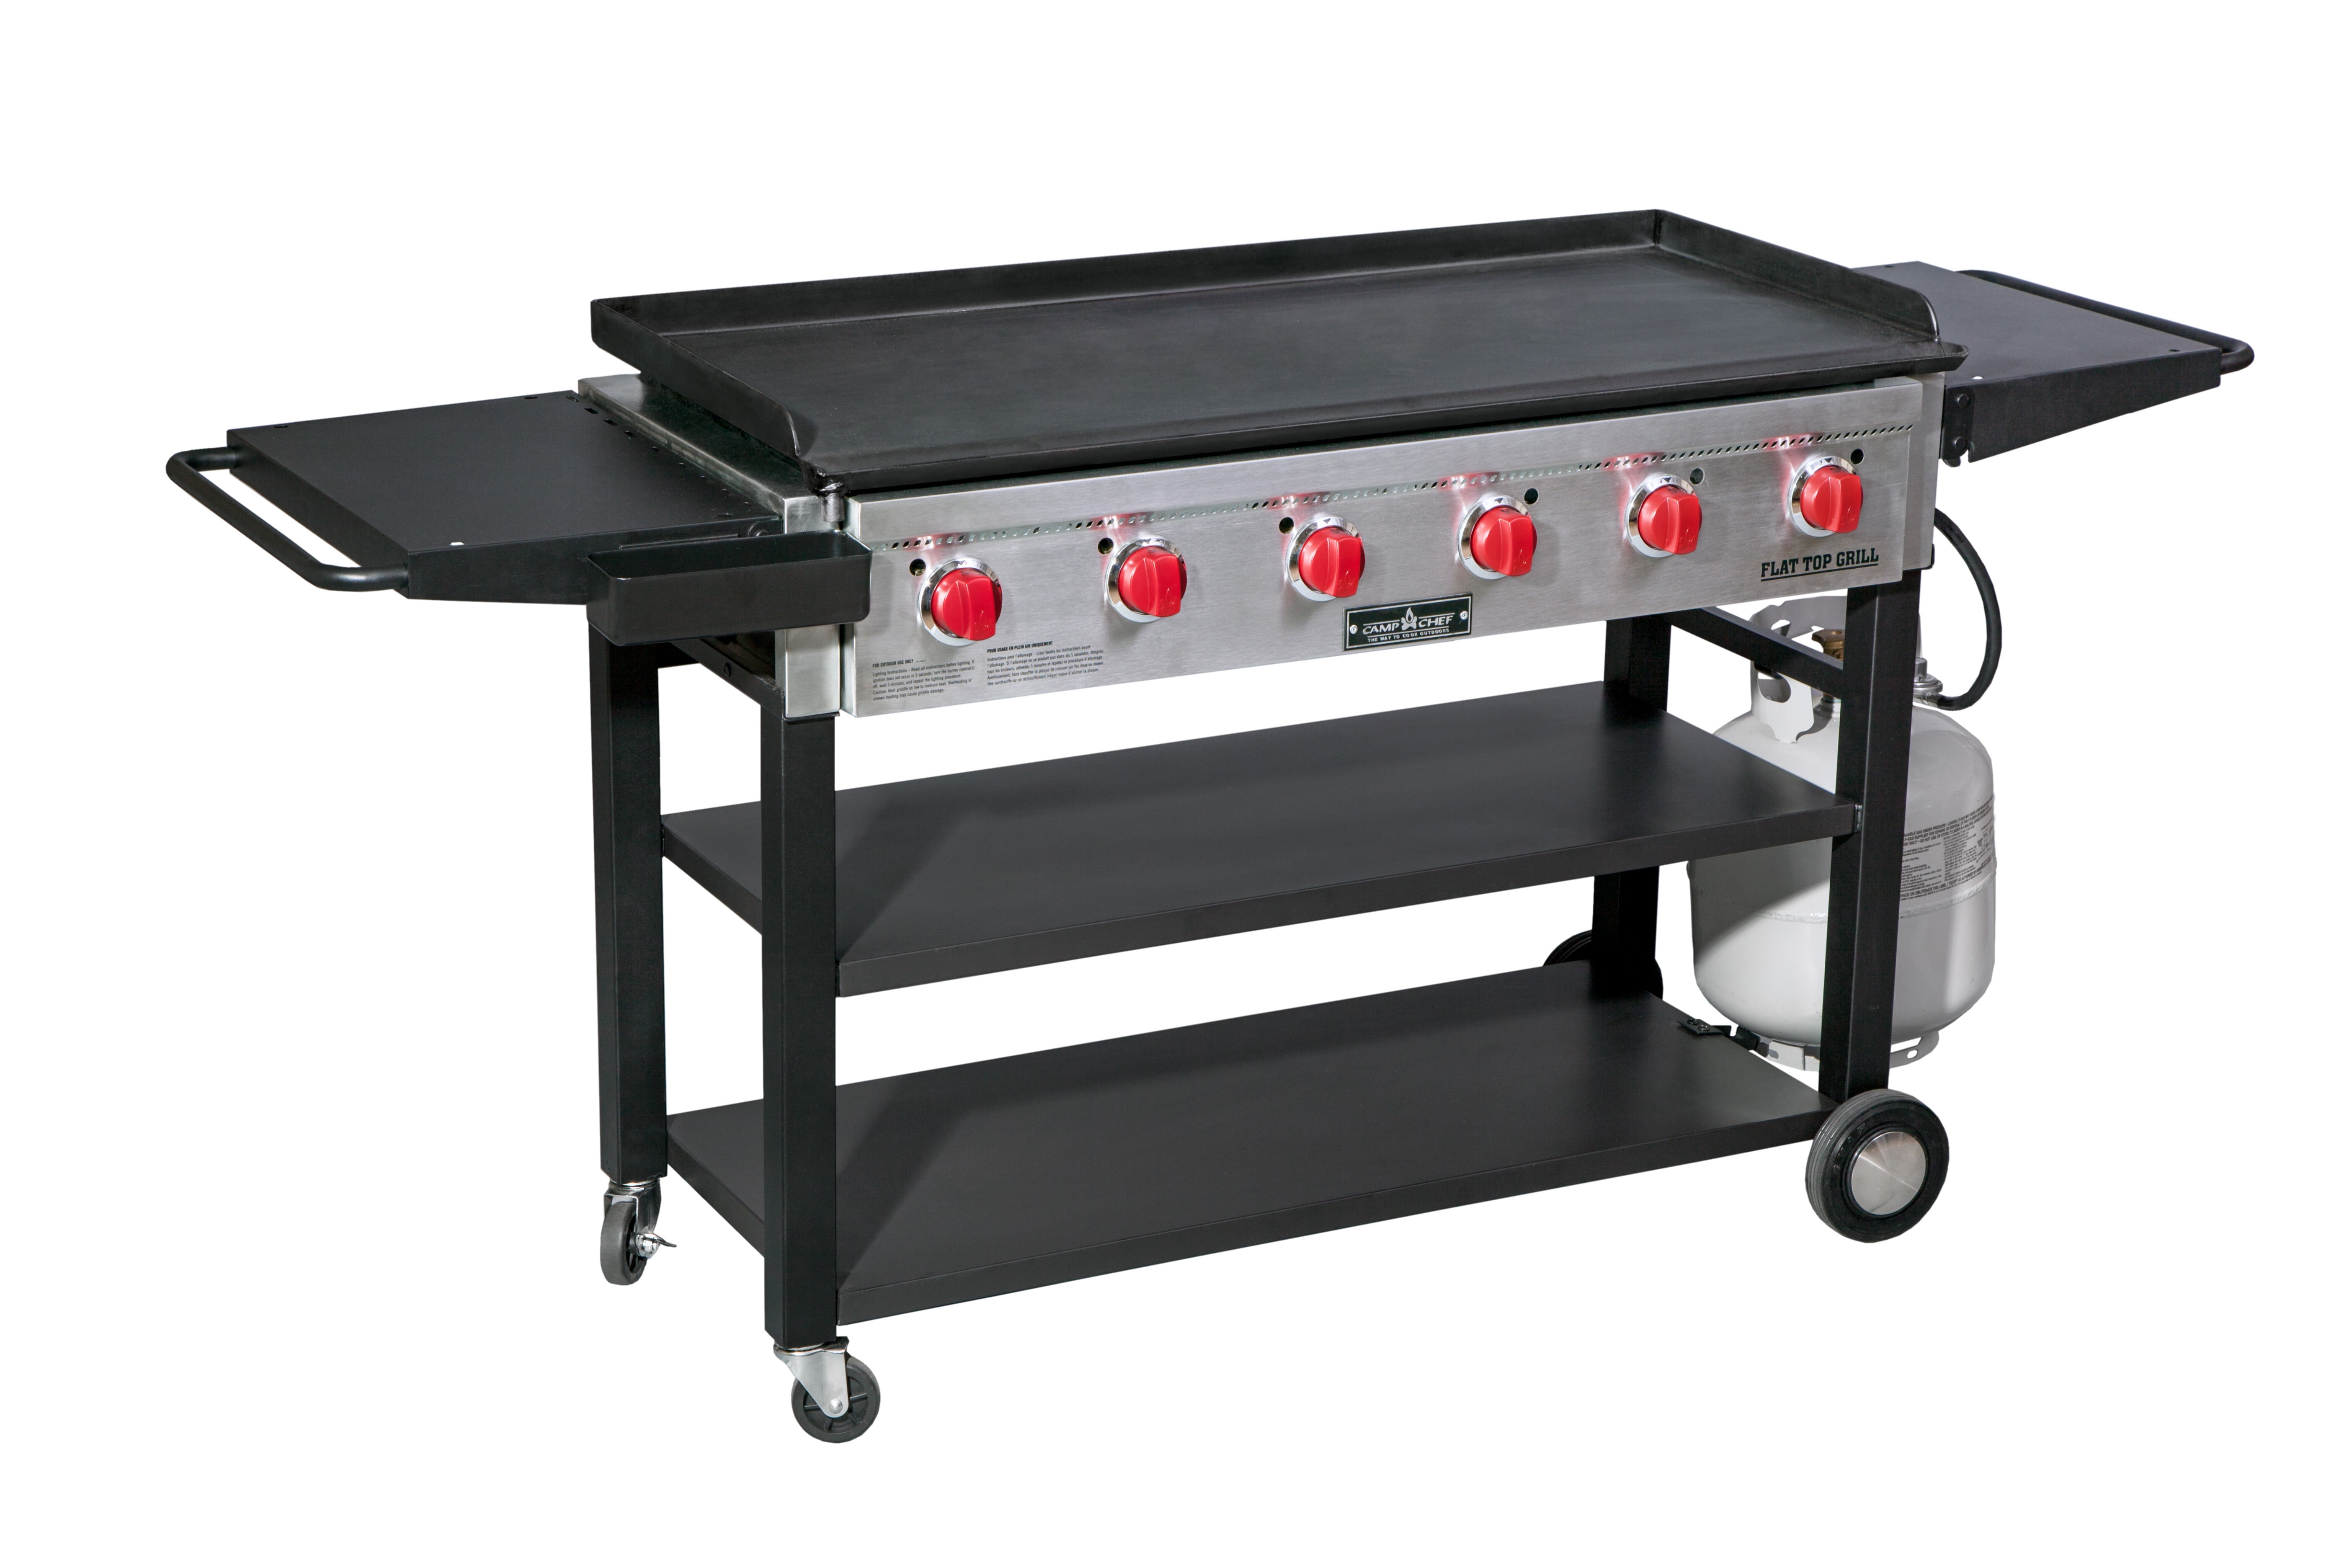 Outdoor kitchen with flat top grill - maximumzoqa